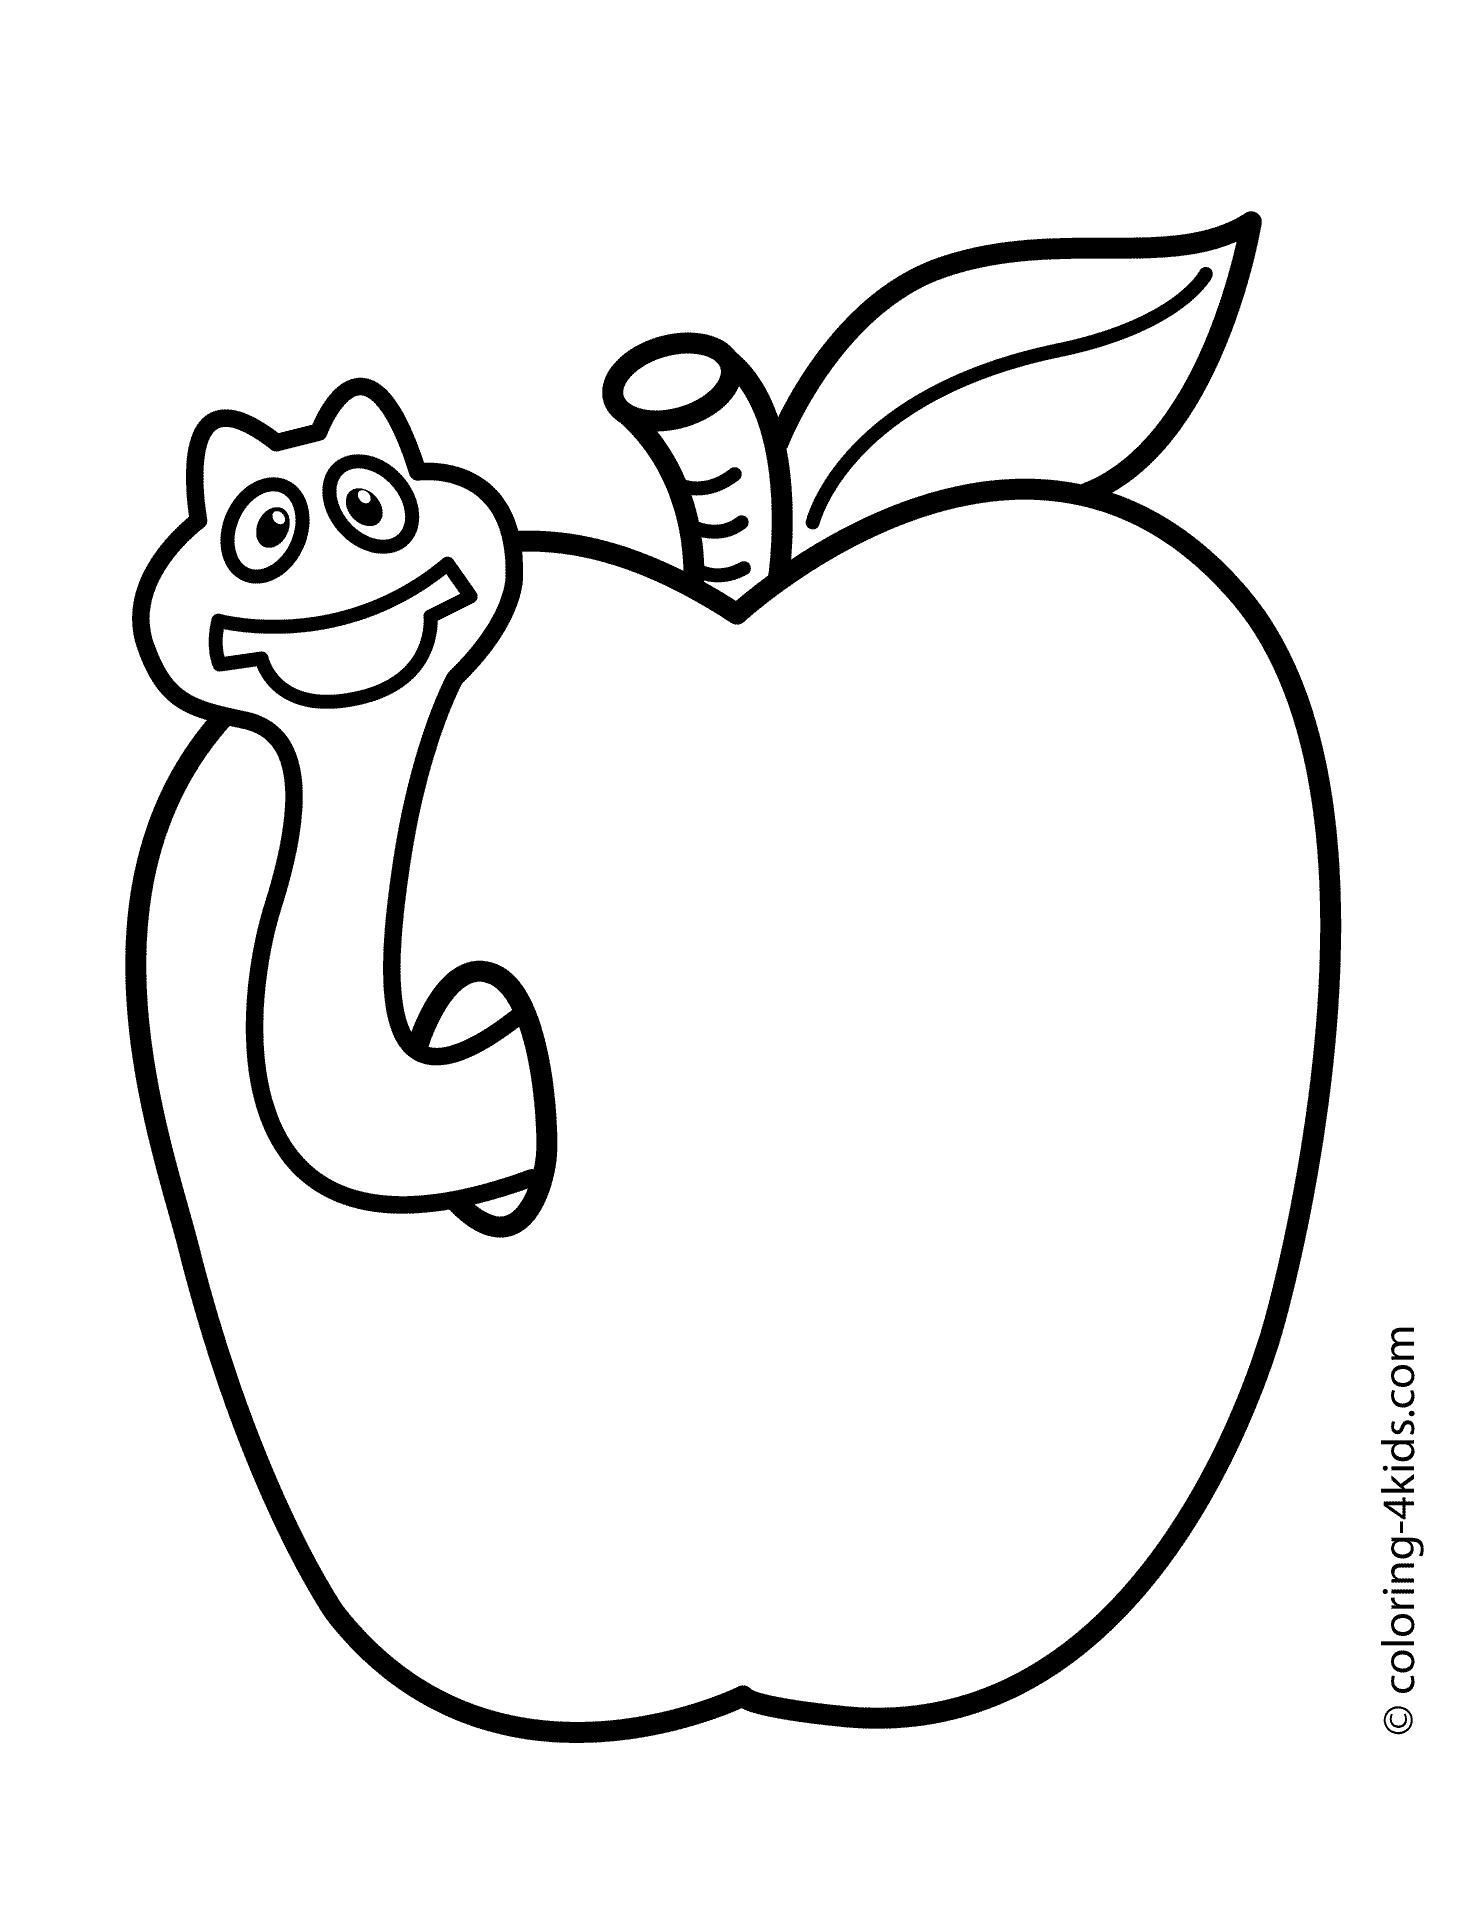 coloring-pages-for-1-year-olds-coloring-pages-for-9-year-olds